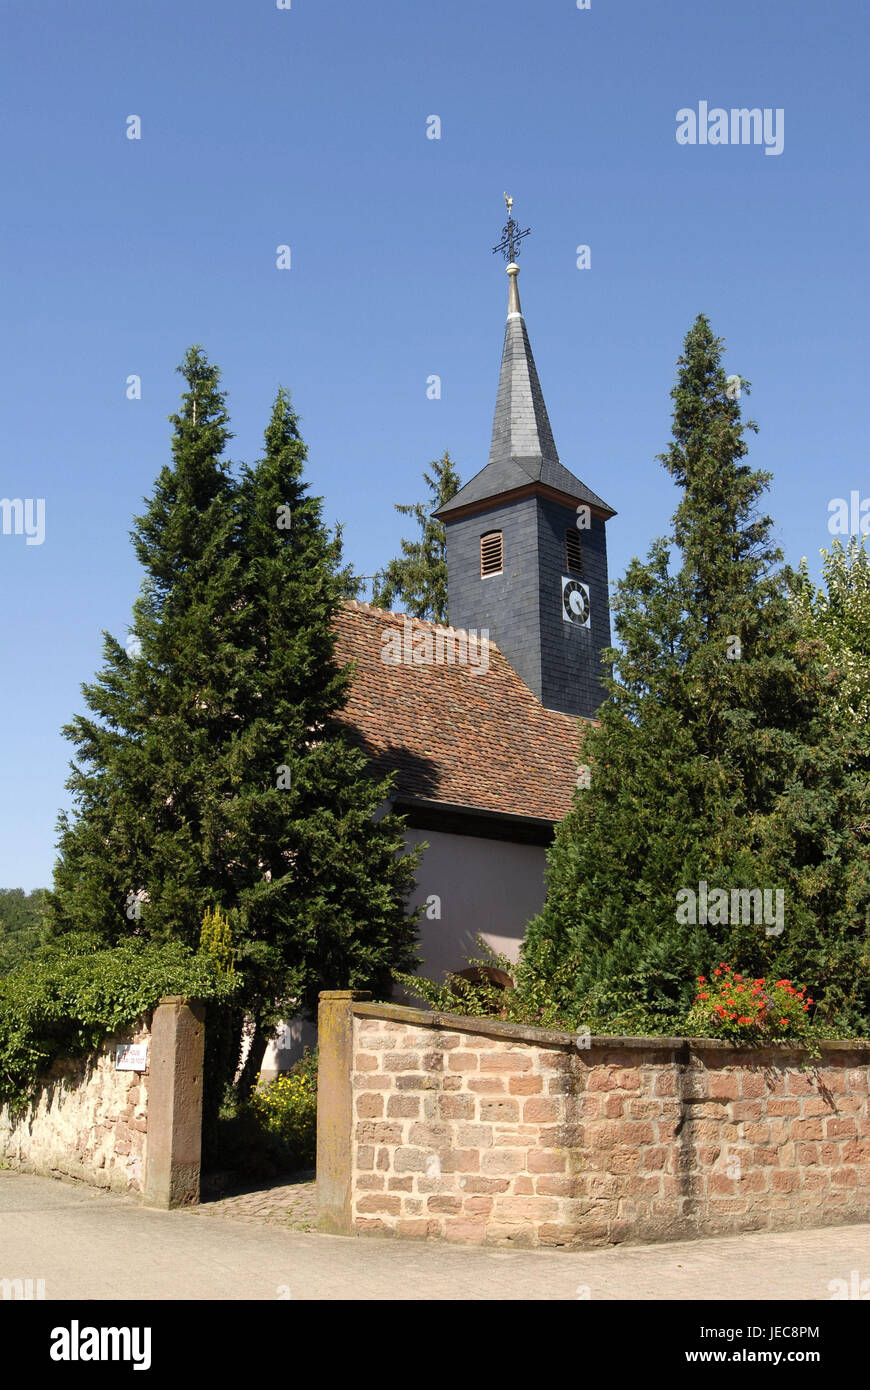 France, Alsace, Bas-Rhin, Geiswiller, church, town, church, steeple, structure, building, architecture, tower, faith, religion, Christianity, Protestant, sky, blue, cloudless, outside, deserted, defensive wall, trees, Stock Photo